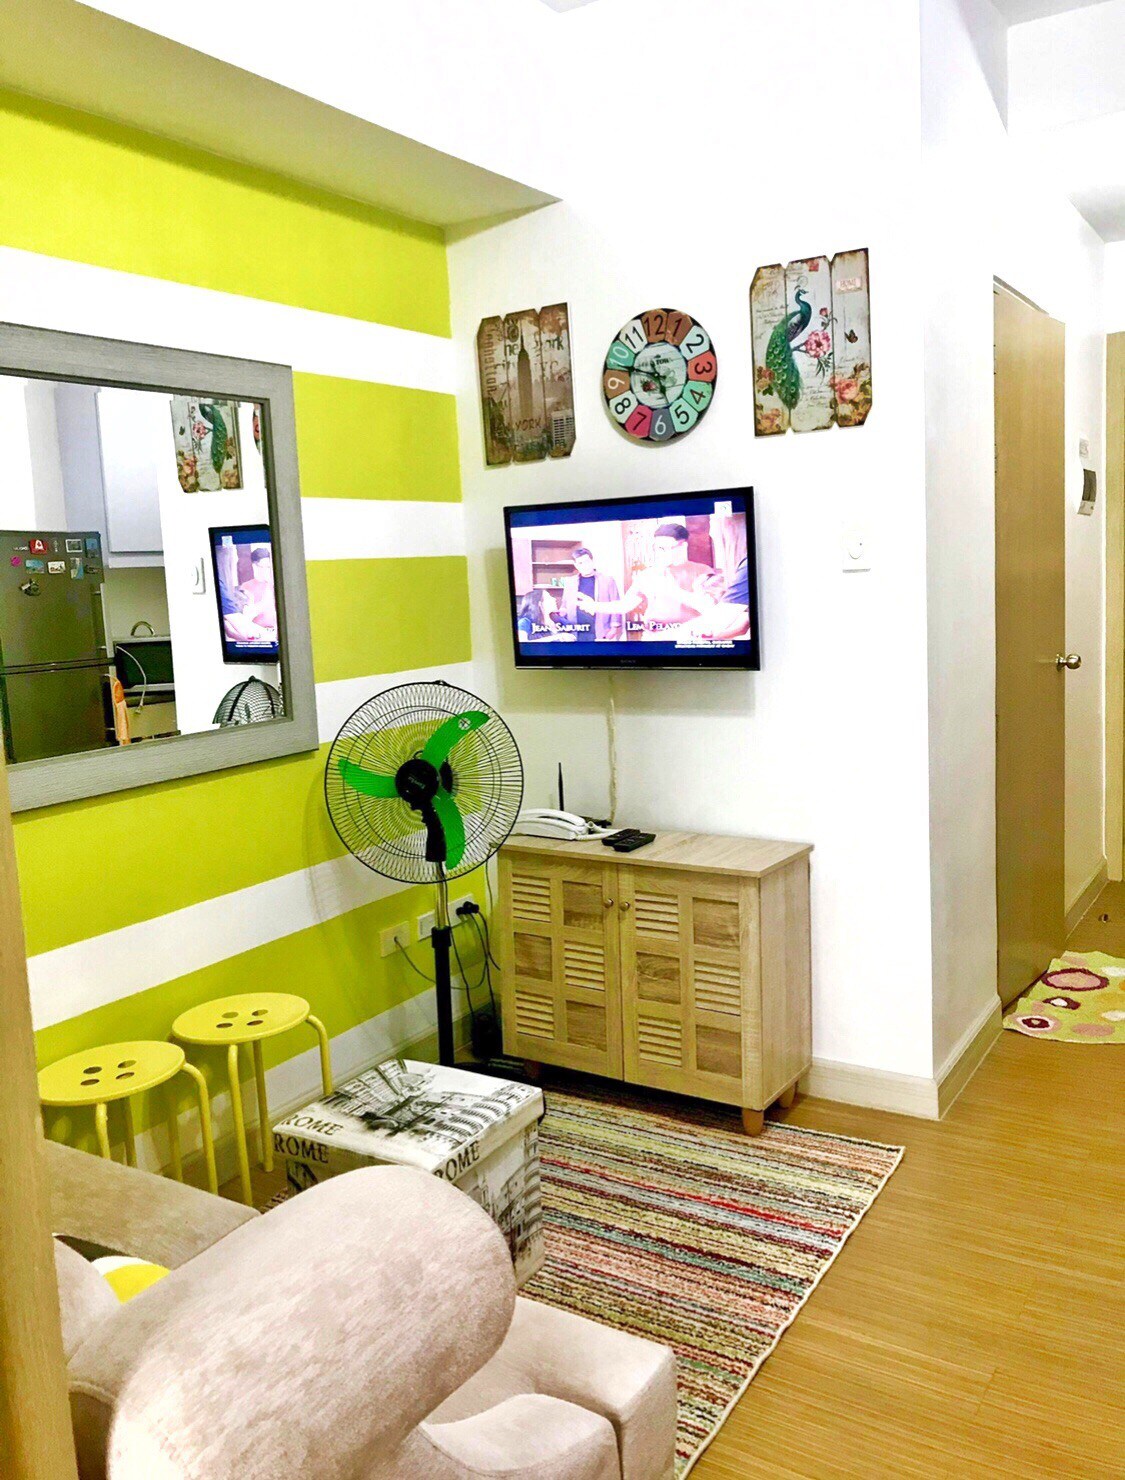 Yuri’s Crib - Best Place for Staycation for 1BR